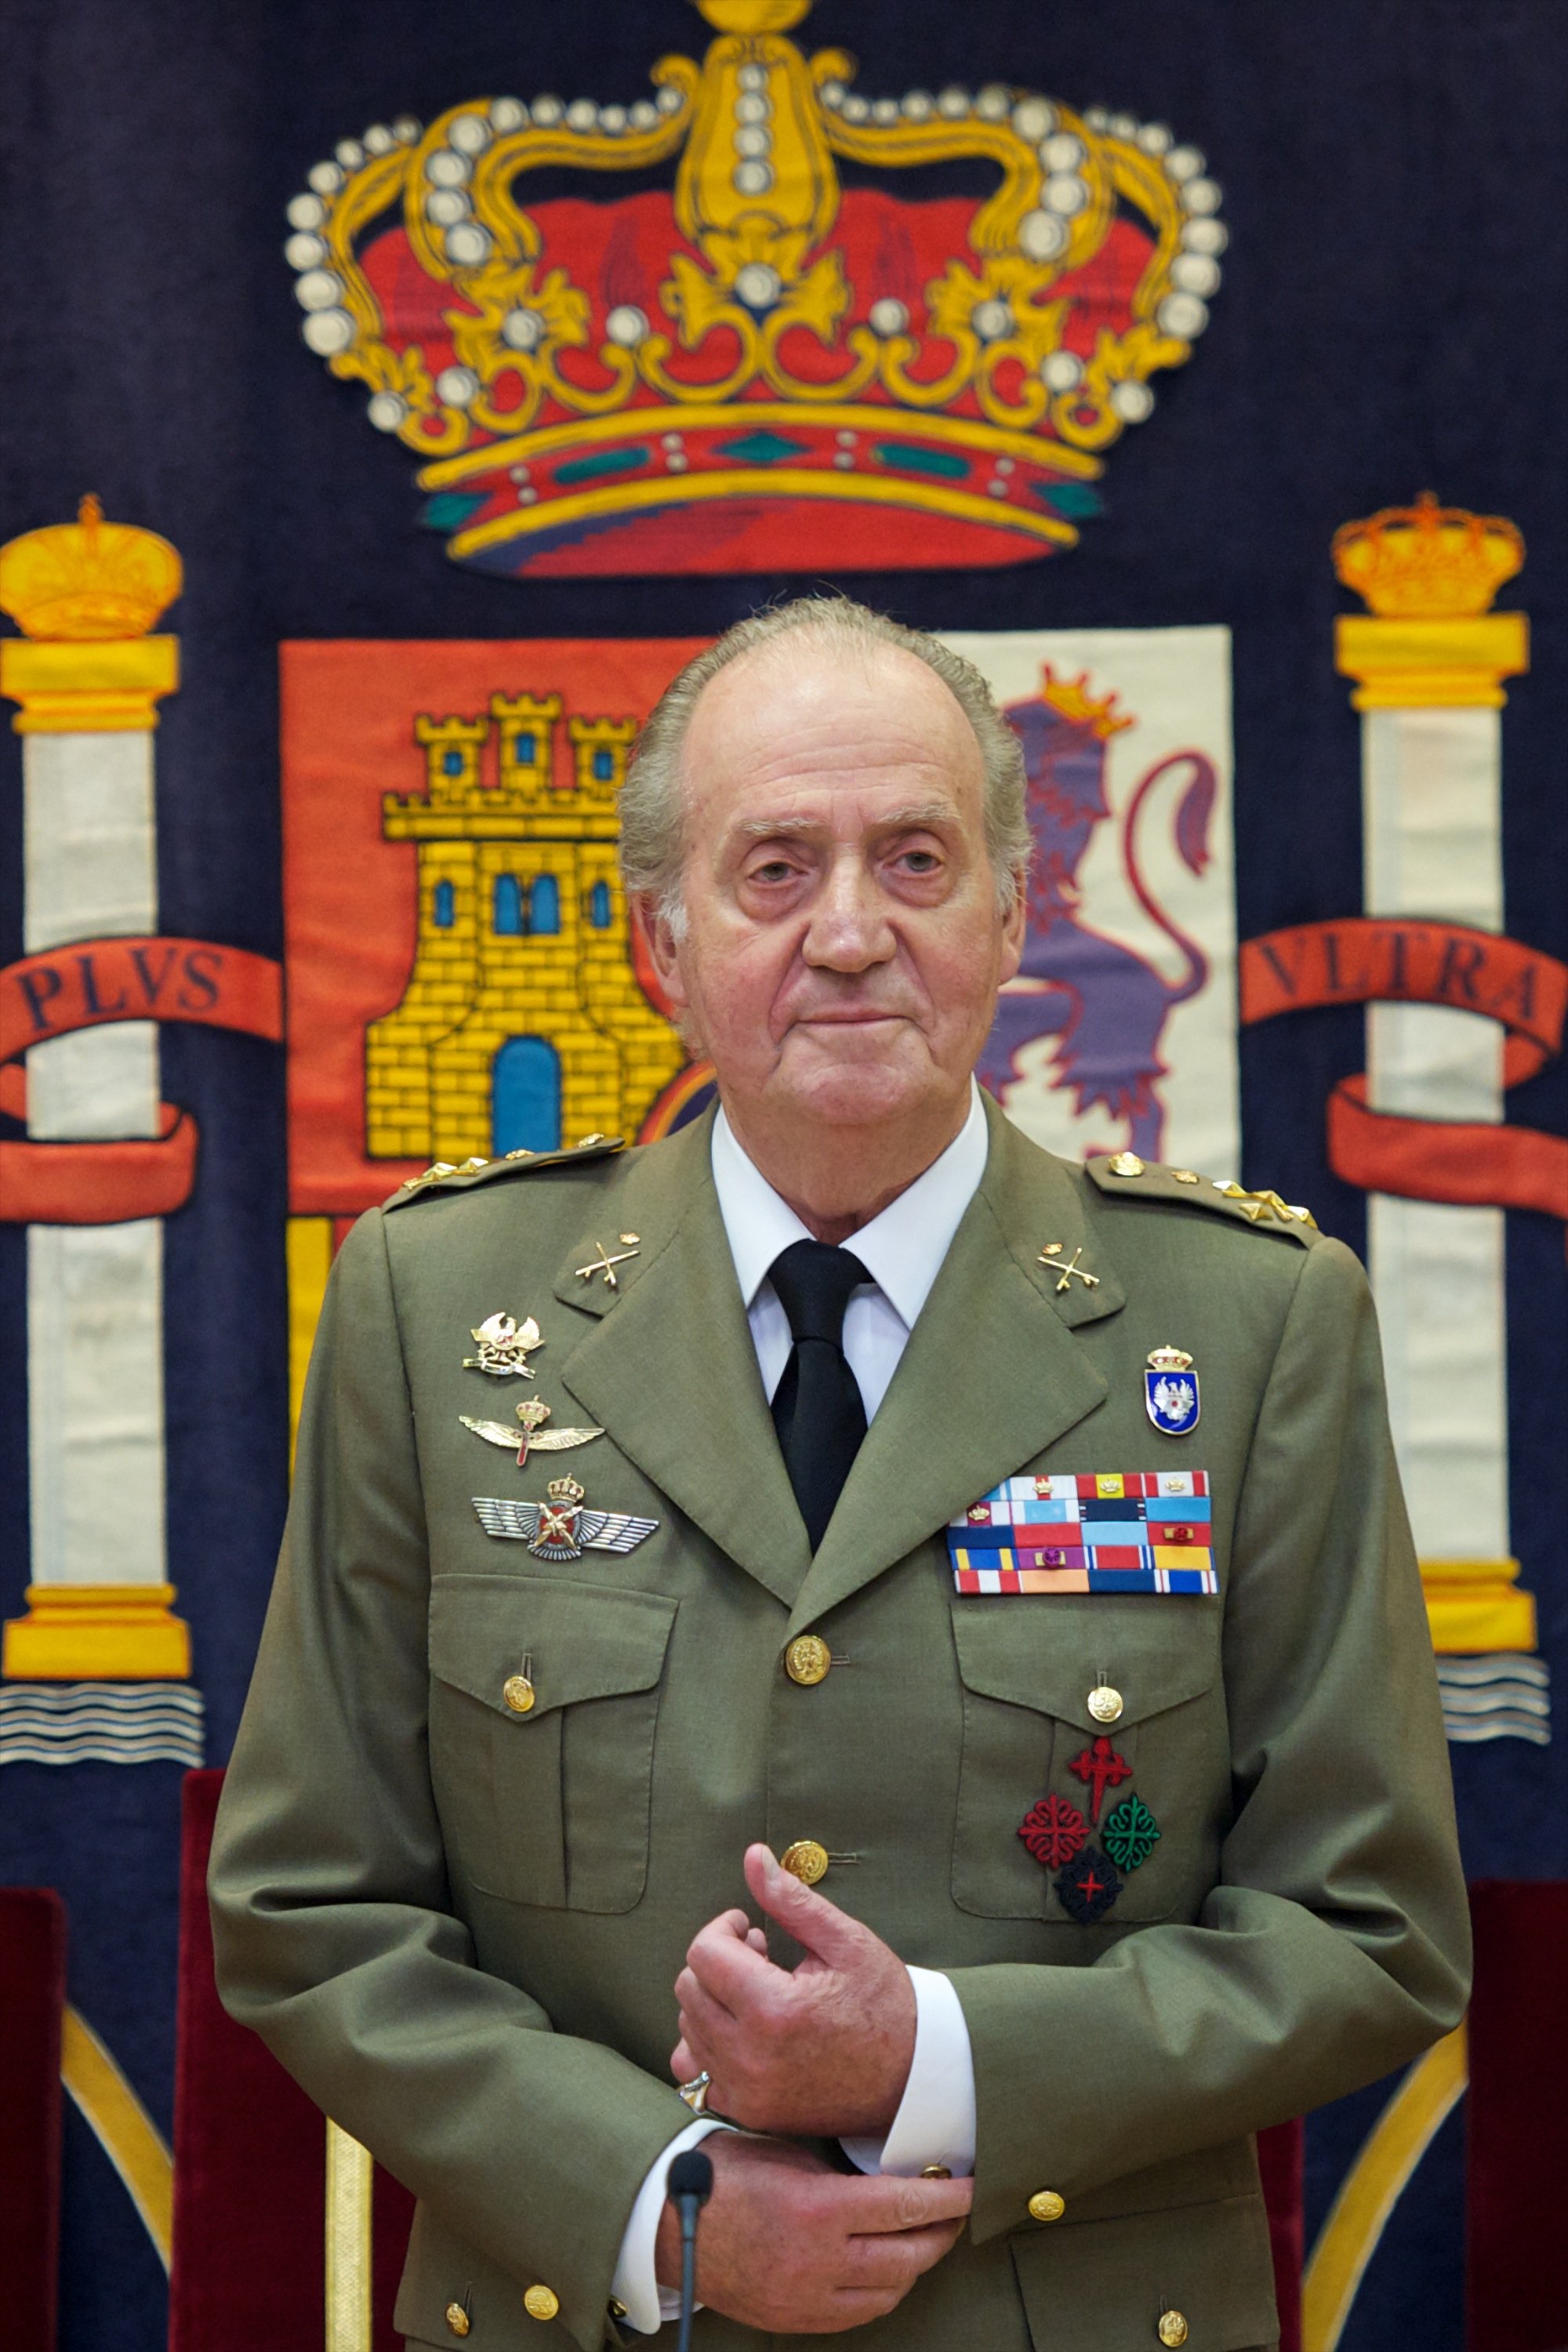 King Juan Carlos of Spain attending the closure of "The General Staff of the Spanish Army" Academic Year on June 29, 2012 in Madrid, Spain. | Source: Getty Images